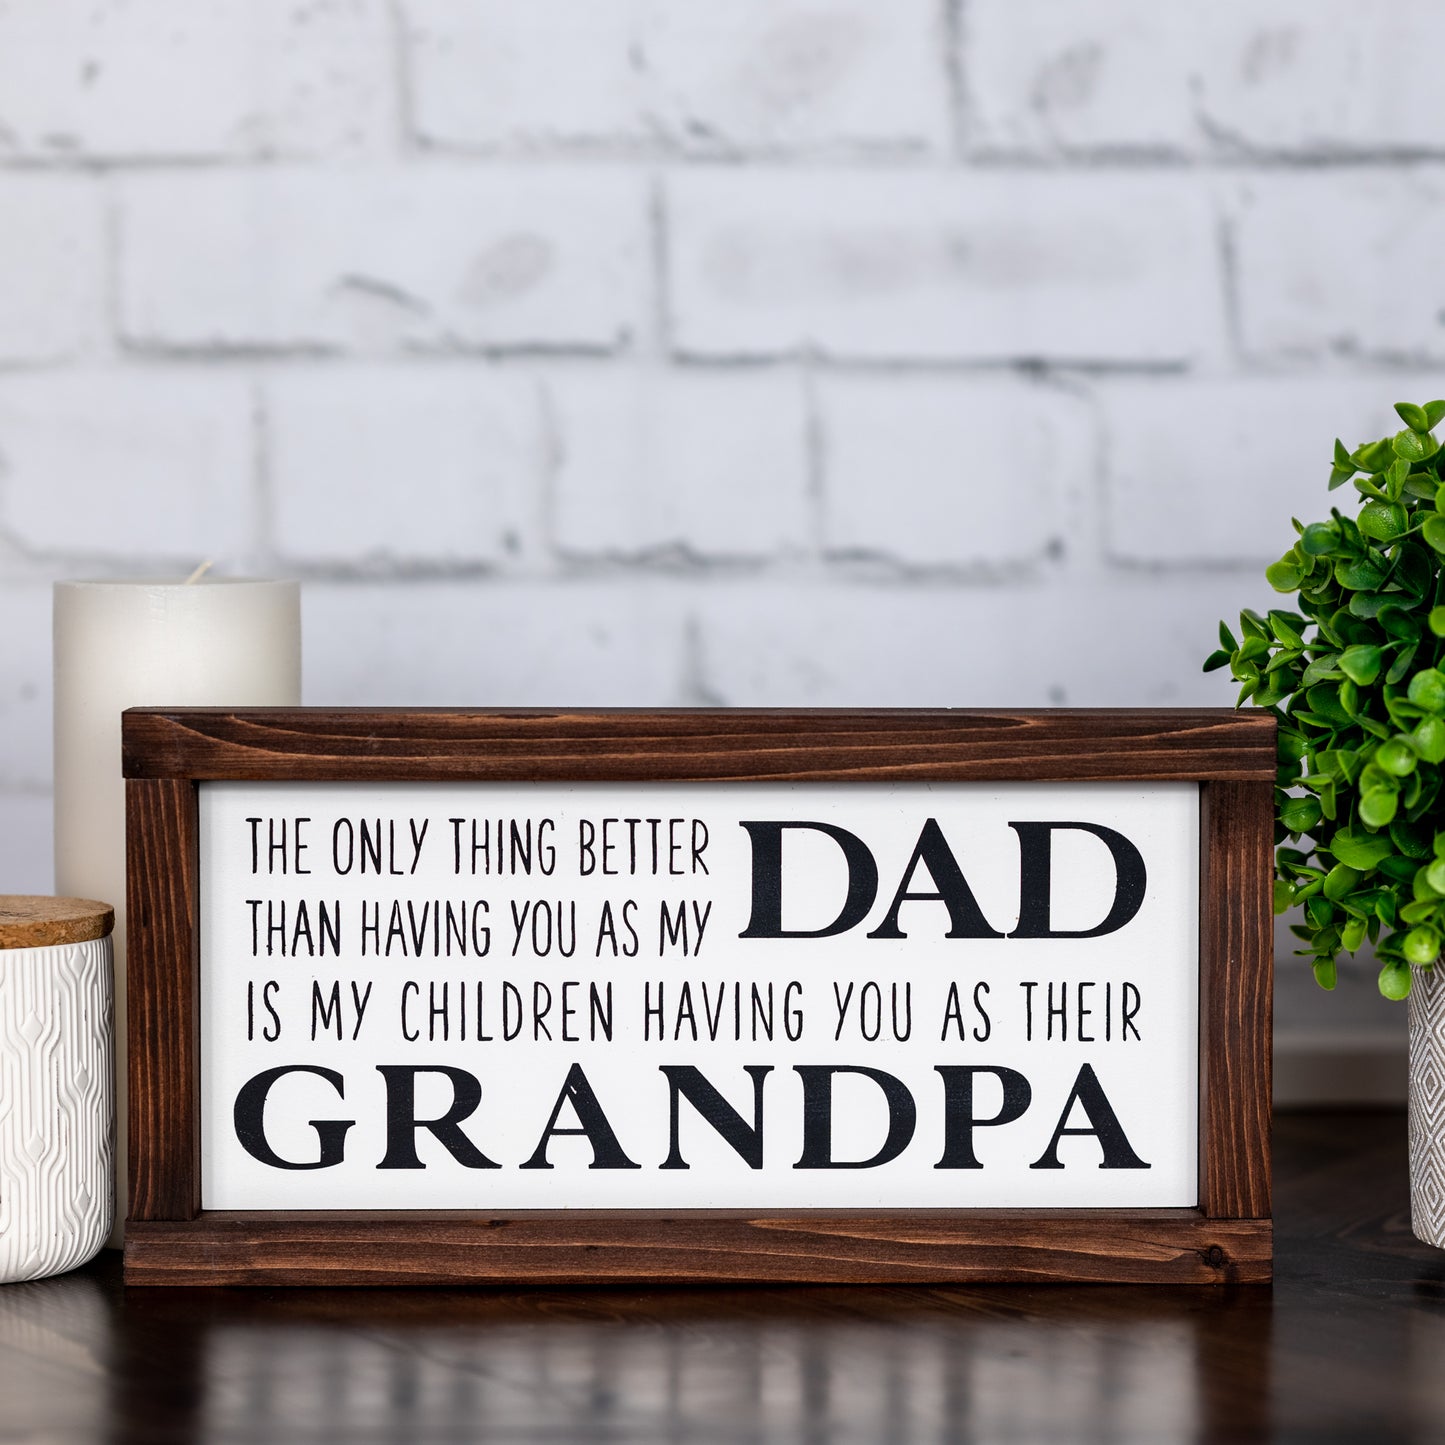 the only thing better than having you as my dad, is my children having you as their grandpa ~ wood sign